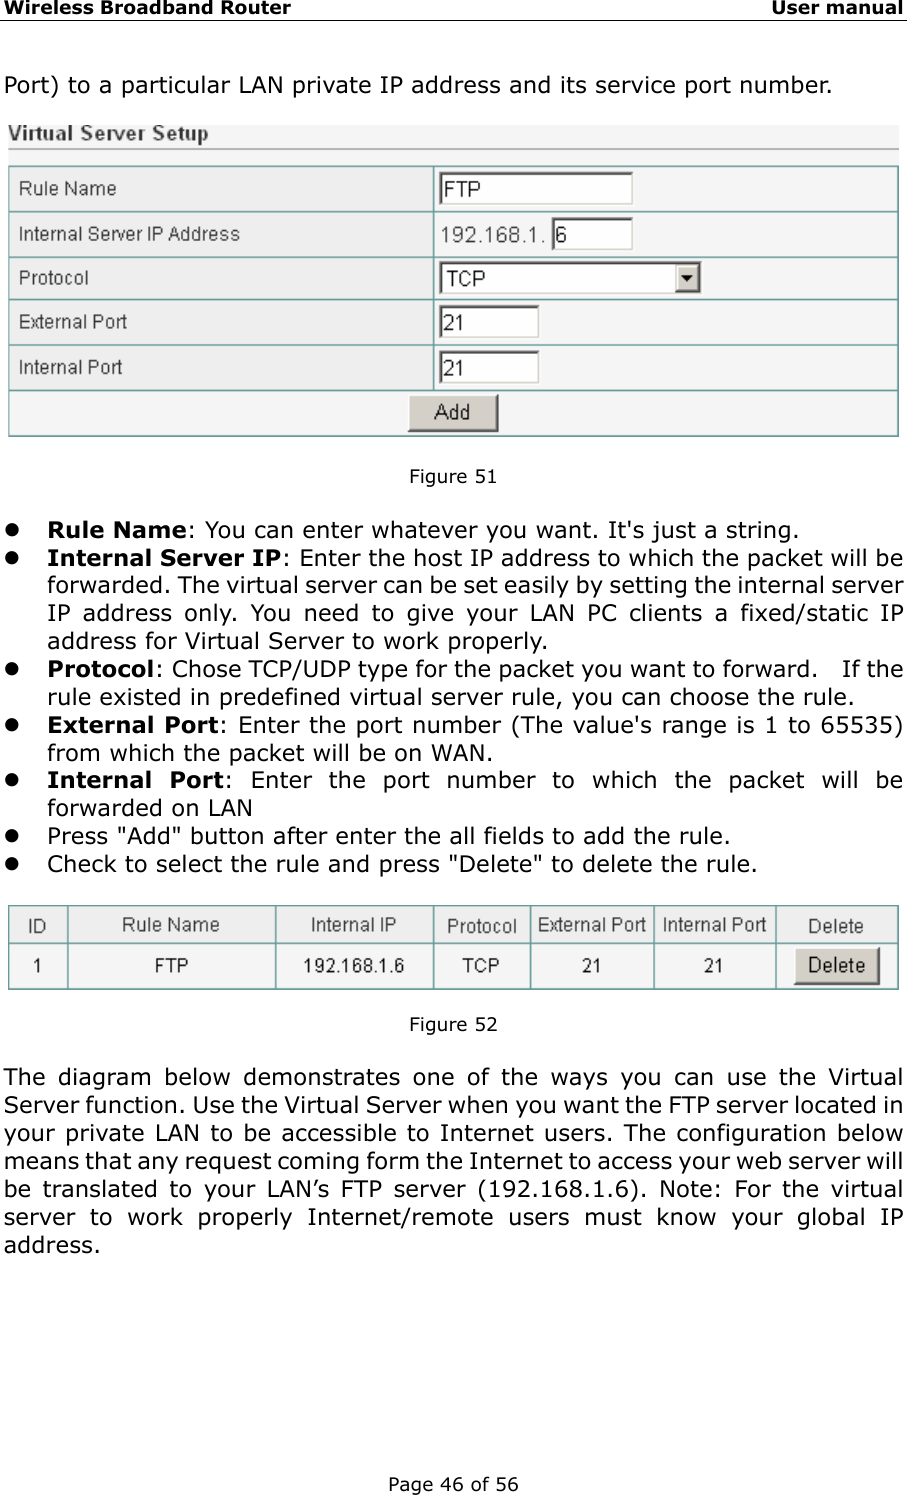 Wireless Broadband Router                                                   User manual Page 46 of 56 Port) to a particular LAN private IP address and its service port number.      Figure 51  z Rule Name: You can enter whatever you want. It&apos;s just a string. z Internal Server IP: Enter the host IP address to which the packet will be forwarded. The virtual server can be set easily by setting the internal server IP address only. You need to give your LAN PC clients a fixed/static IP address for Virtual Server to work properly. z Protocol: Chose TCP/UDP type for the packet you want to forward.    If the rule existed in predefined virtual server rule, you can choose the rule. z External Port: Enter the port number (The value&apos;s range is 1 to 65535) from which the packet will be on WAN. z Internal Port: Enter the port number to which the packet will be forwarded on LAN z Press &quot;Add&quot; button after enter the all fields to add the rule. z Check to select the rule and press &quot;Delete&quot; to delete the rule.    Figure 52  The diagram below demonstrates one of the ways you can use the Virtual Server function. Use the Virtual Server when you want the FTP server located in your private LAN to be accessible to Internet users. The configuration below means that any request coming form the Internet to access your web server will be translated to your LAN’s FTP server (192.168.1.6). Note: For the virtual server to work properly Internet/remote users must know your global IP address. 